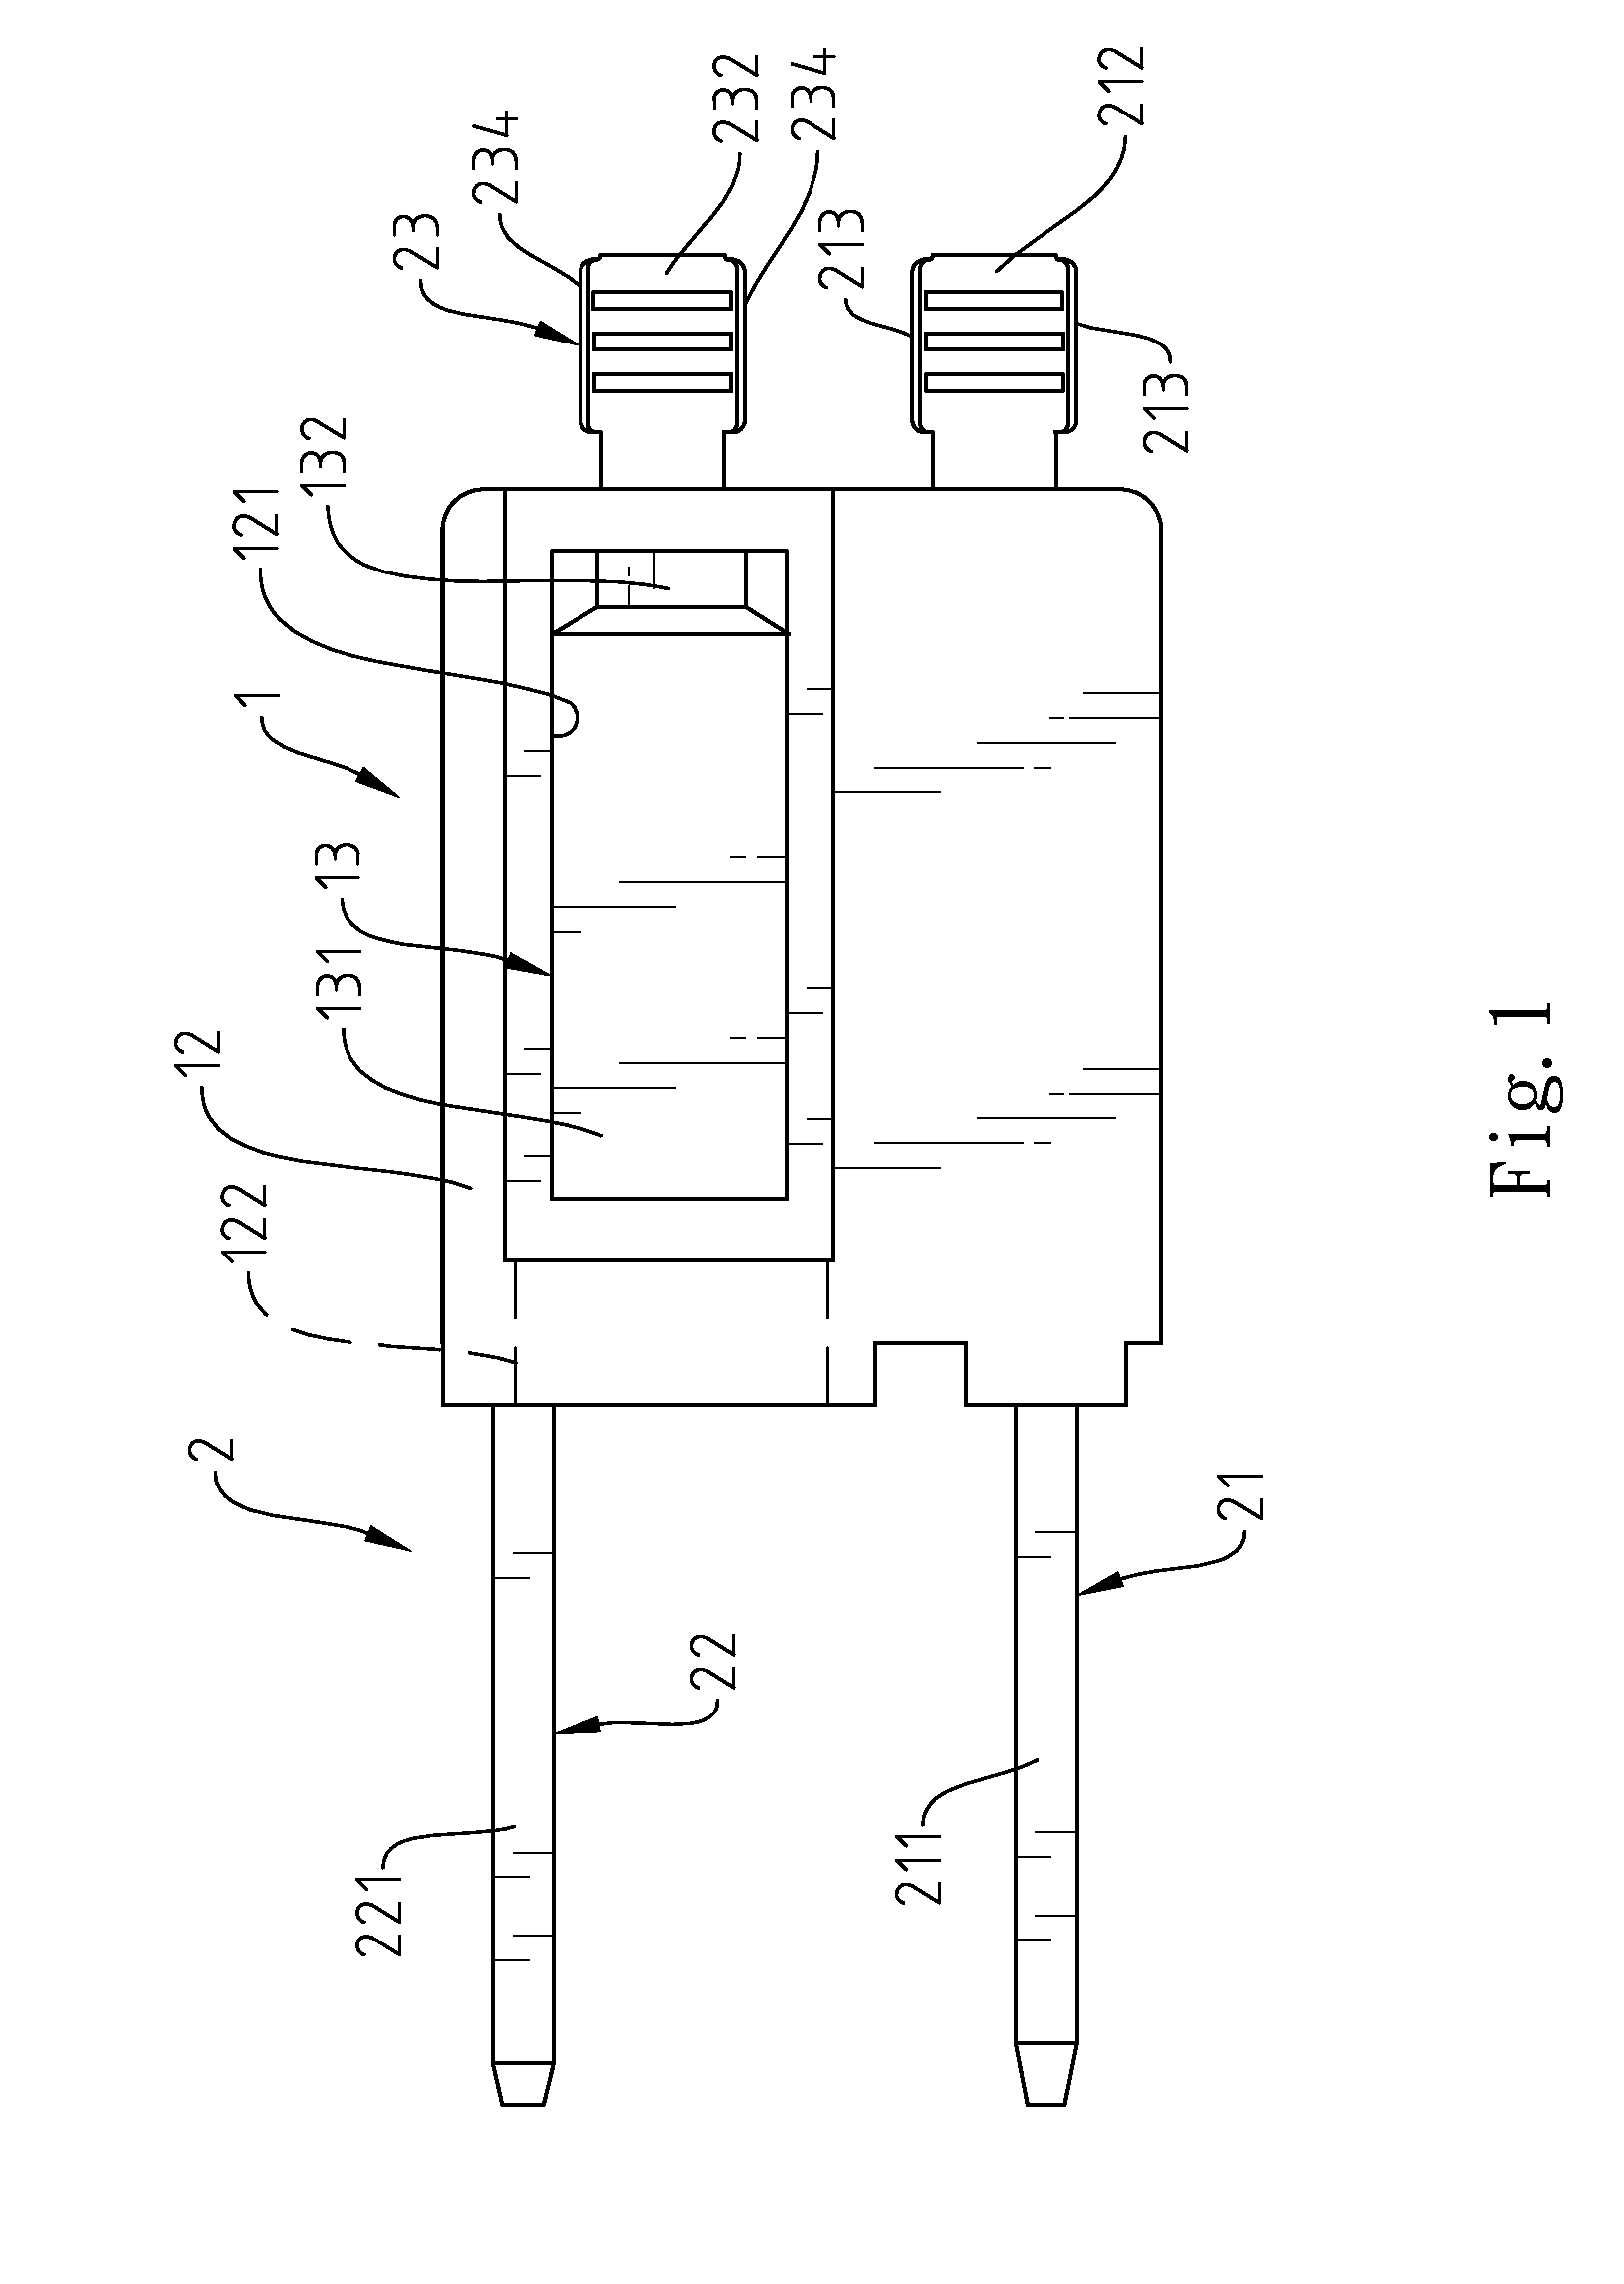 Electrical plug with a sliding cover extending from a front of an internal contact holder